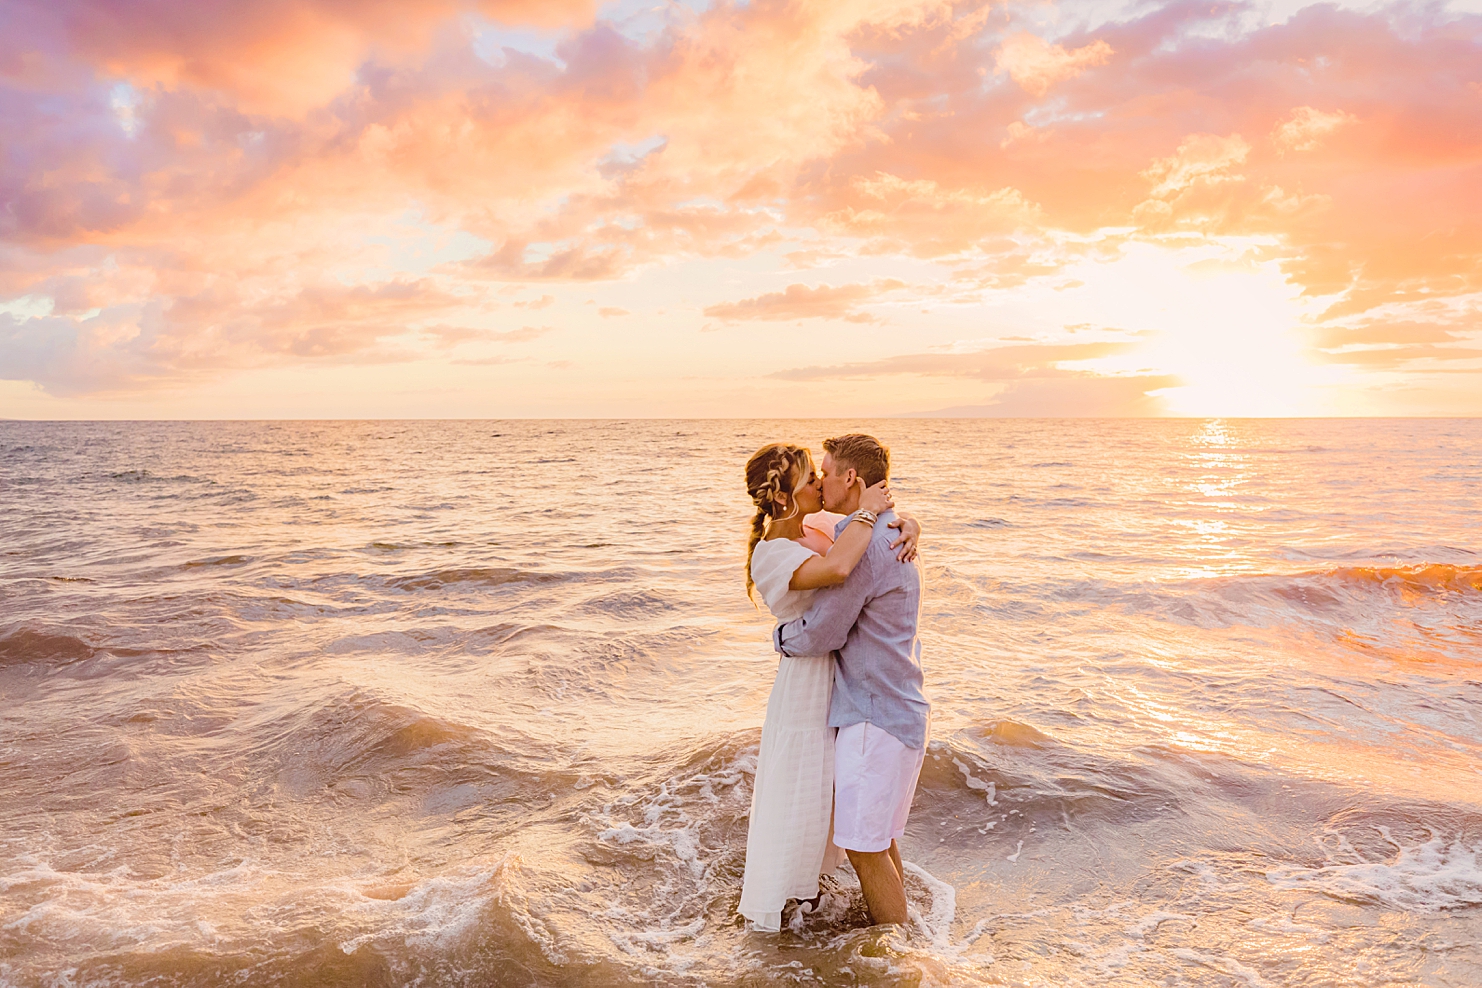 hawaii beach photoshoot ideas couple kisses at sunset on the beach woman with blond hair in a braid wearing a white dress holds her husband around the shoulders